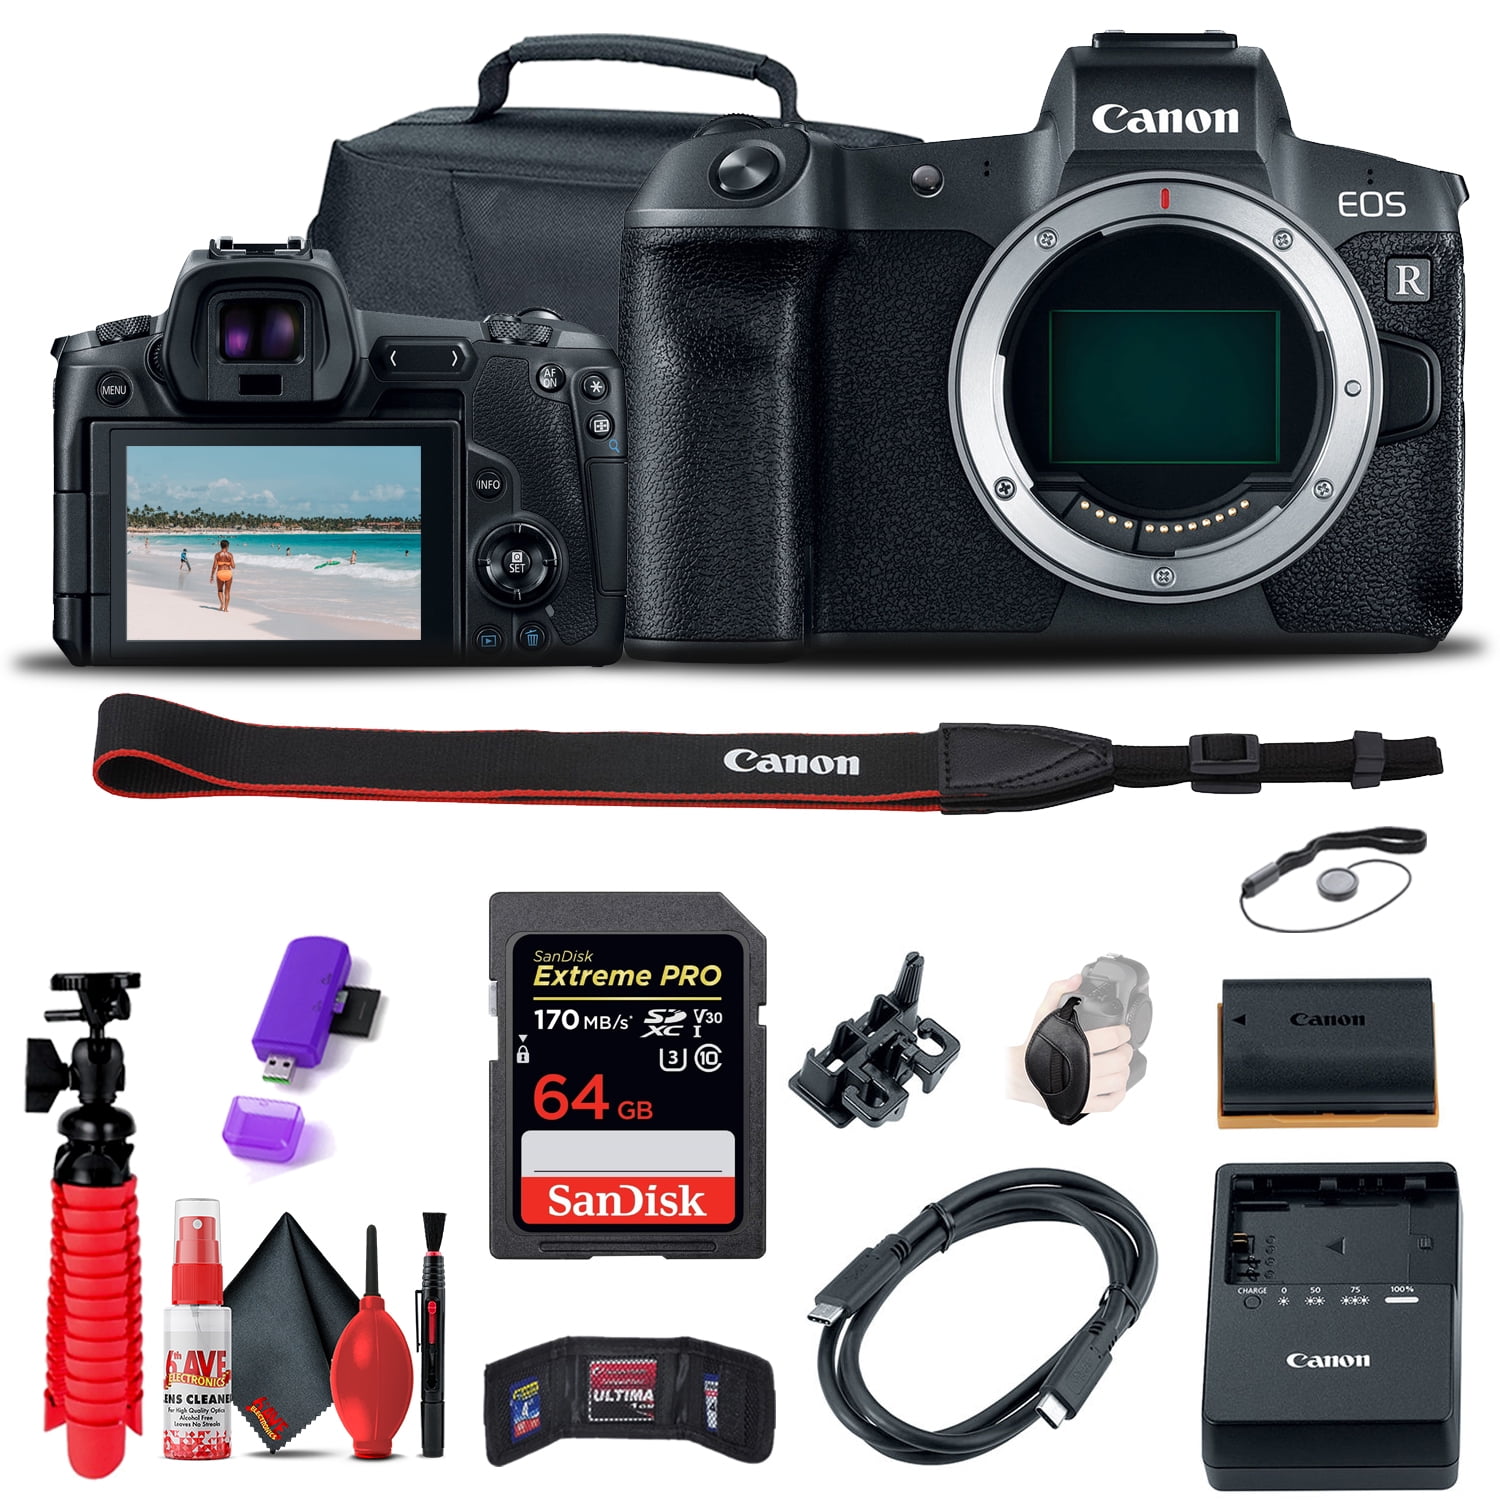 Canon EOS R Mirrorless Digital Camera Body Only (3075C002), 64GB Memory  Card, Case, Card Reader, Flex Tripod, Hand Strap, Cap Keeper, Memory  Wallet, Cleaning Kit 